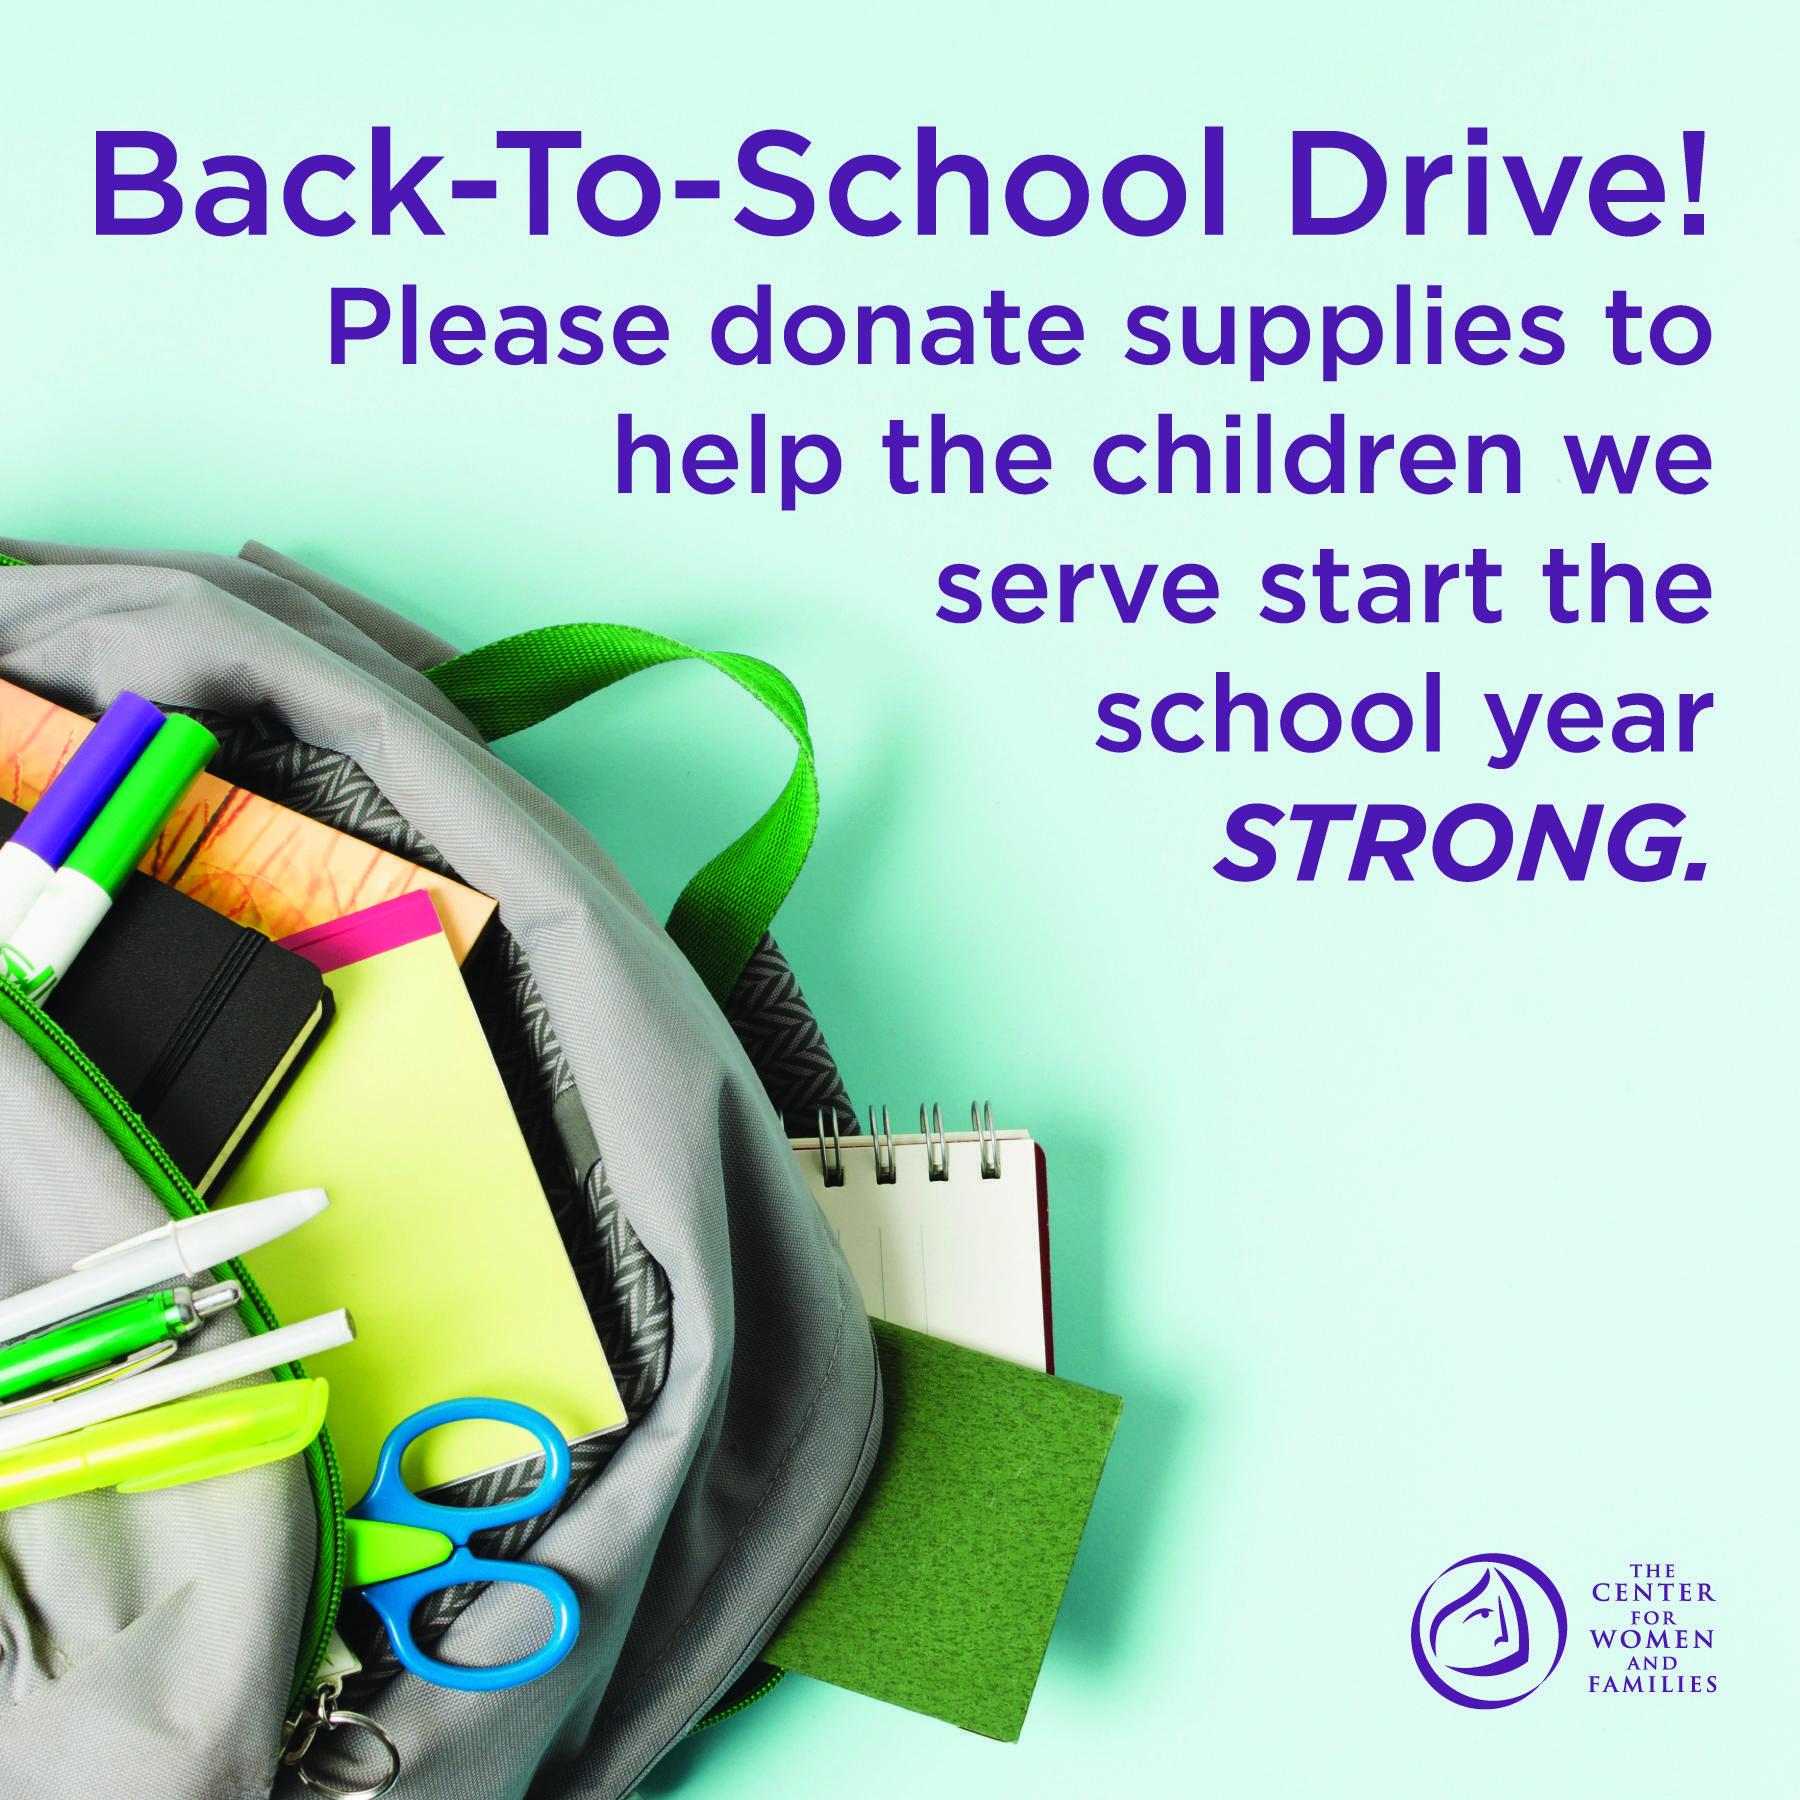 Image of backpack with school supplies. The wording is a request to help the children we serve start the school year strong by donating school supplies